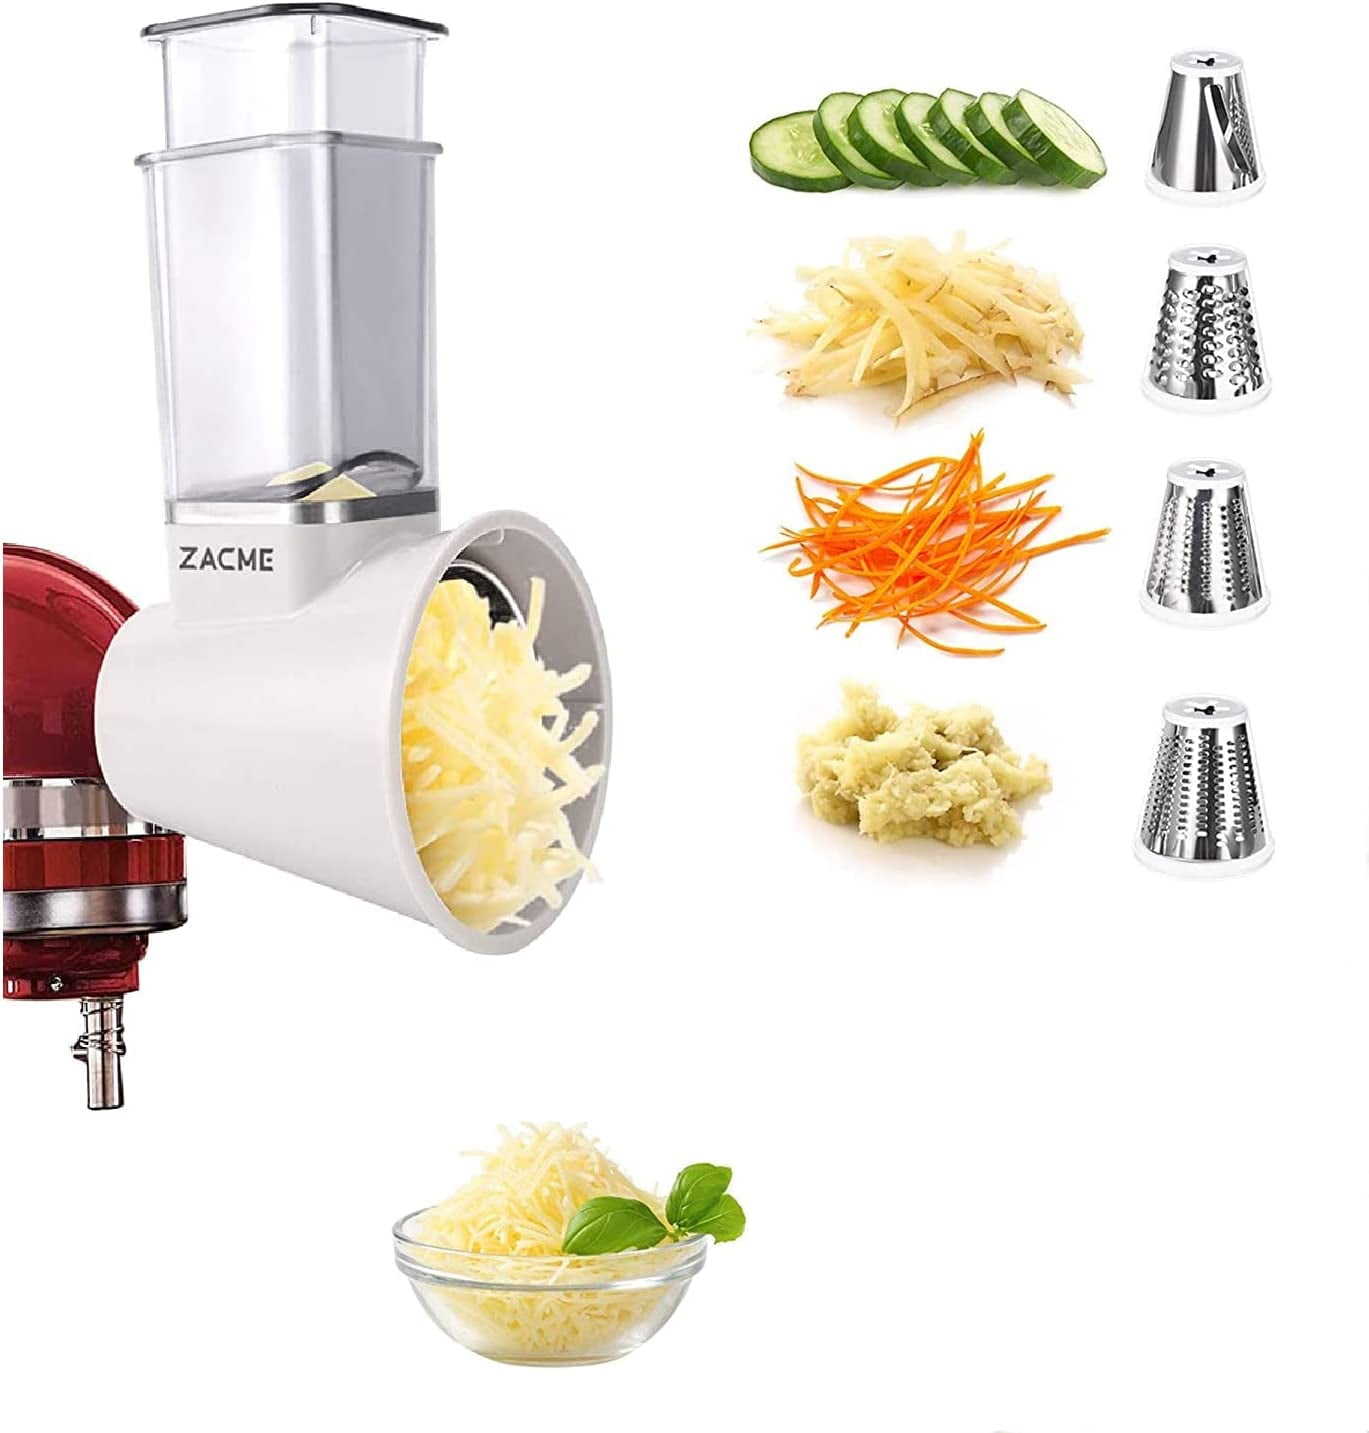 Coolcook Slicer Shredder Attachment for KitchenAid Stand Mixer, Cheese  Grater Attachment for KitchenAid, Salad Shredders Included 3 Blades, for